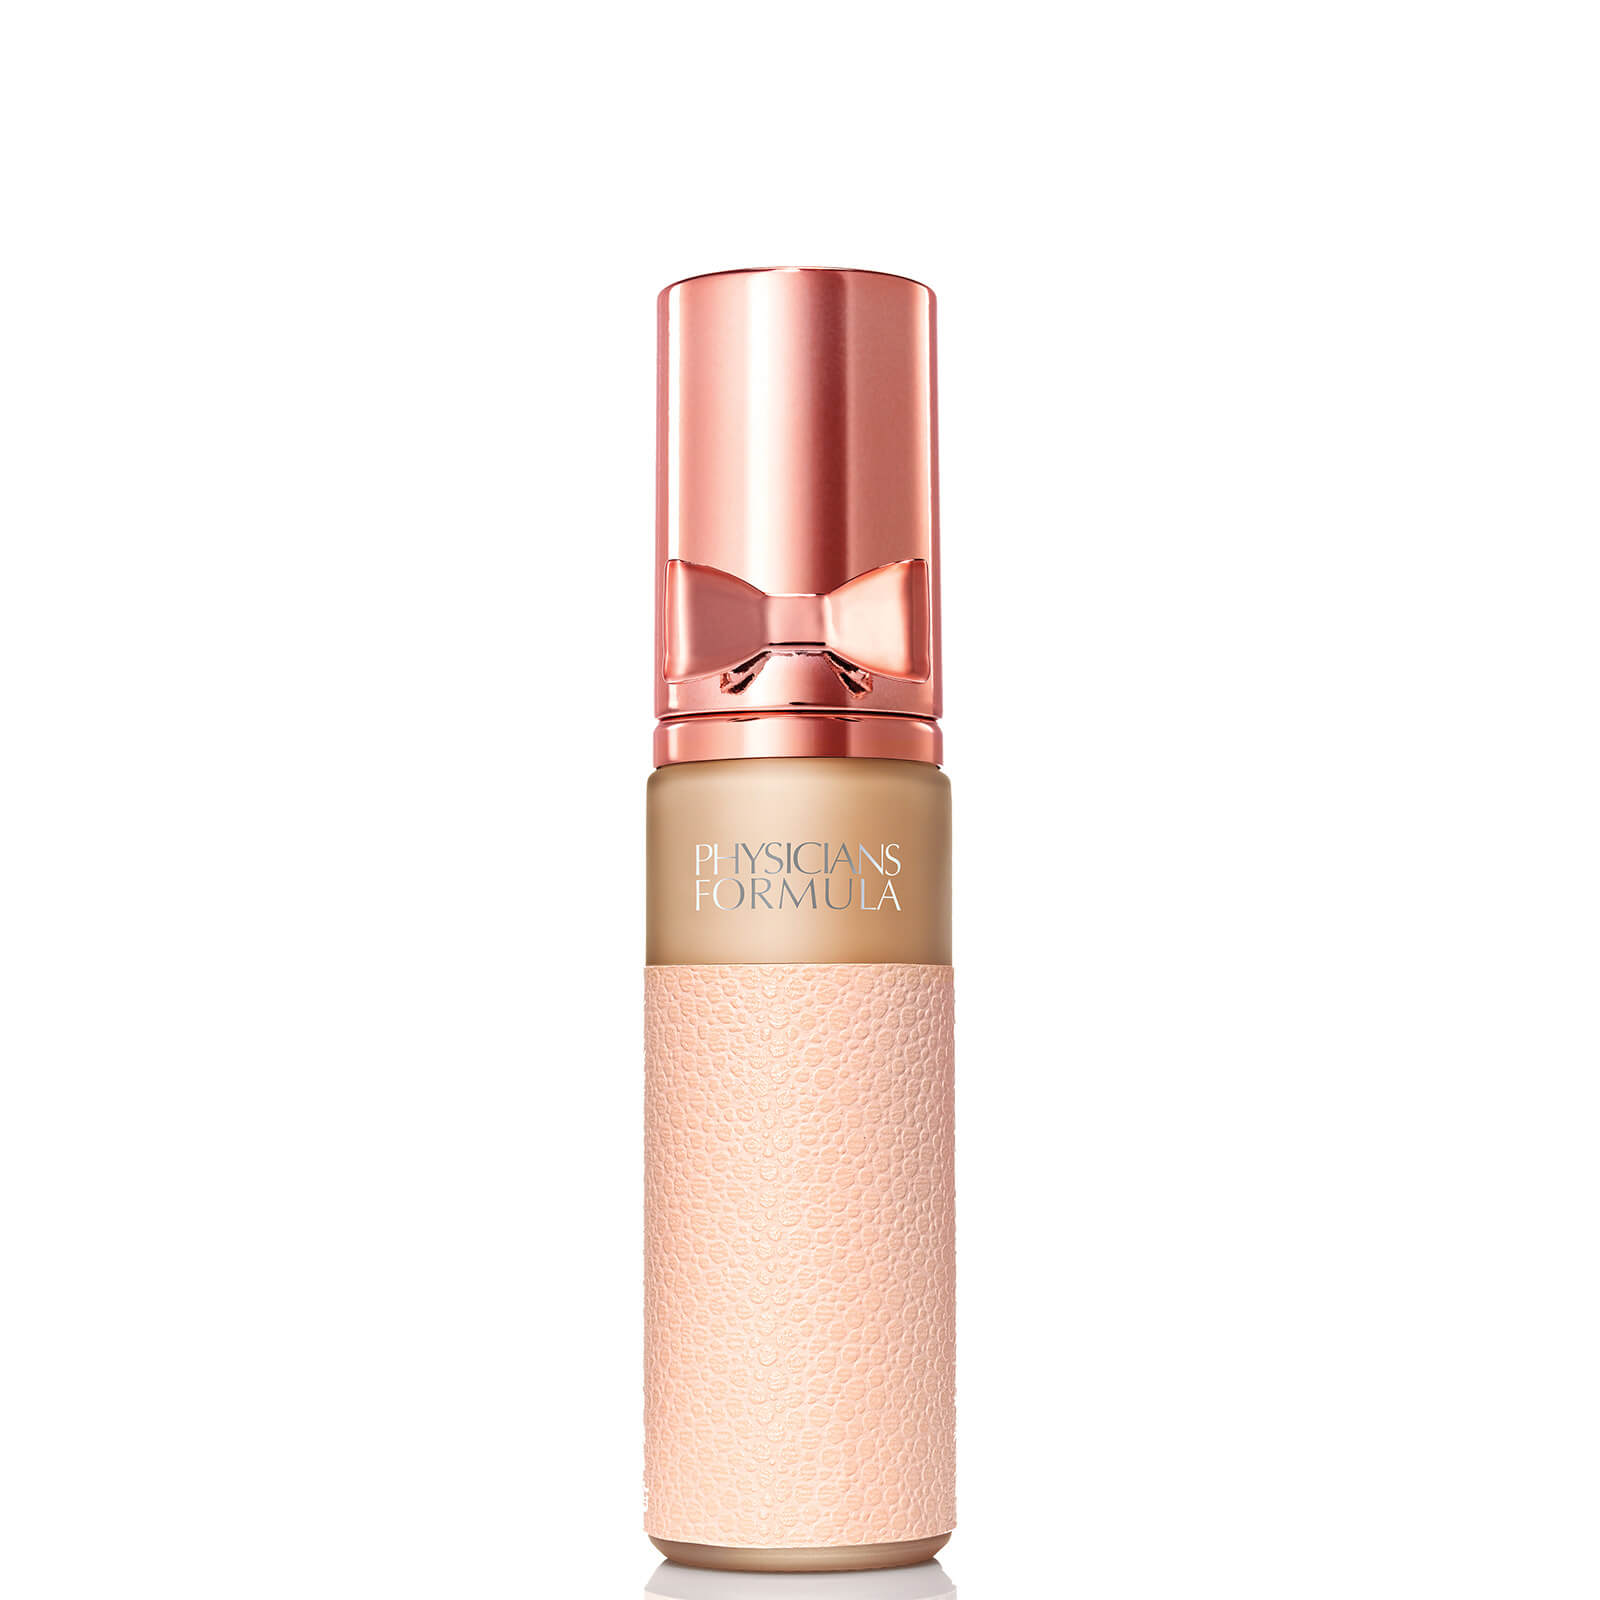 Physicians Formula Nude Wear Touch of Glow Foundation 30ml (Various Shades) - Light von Physicians Formula